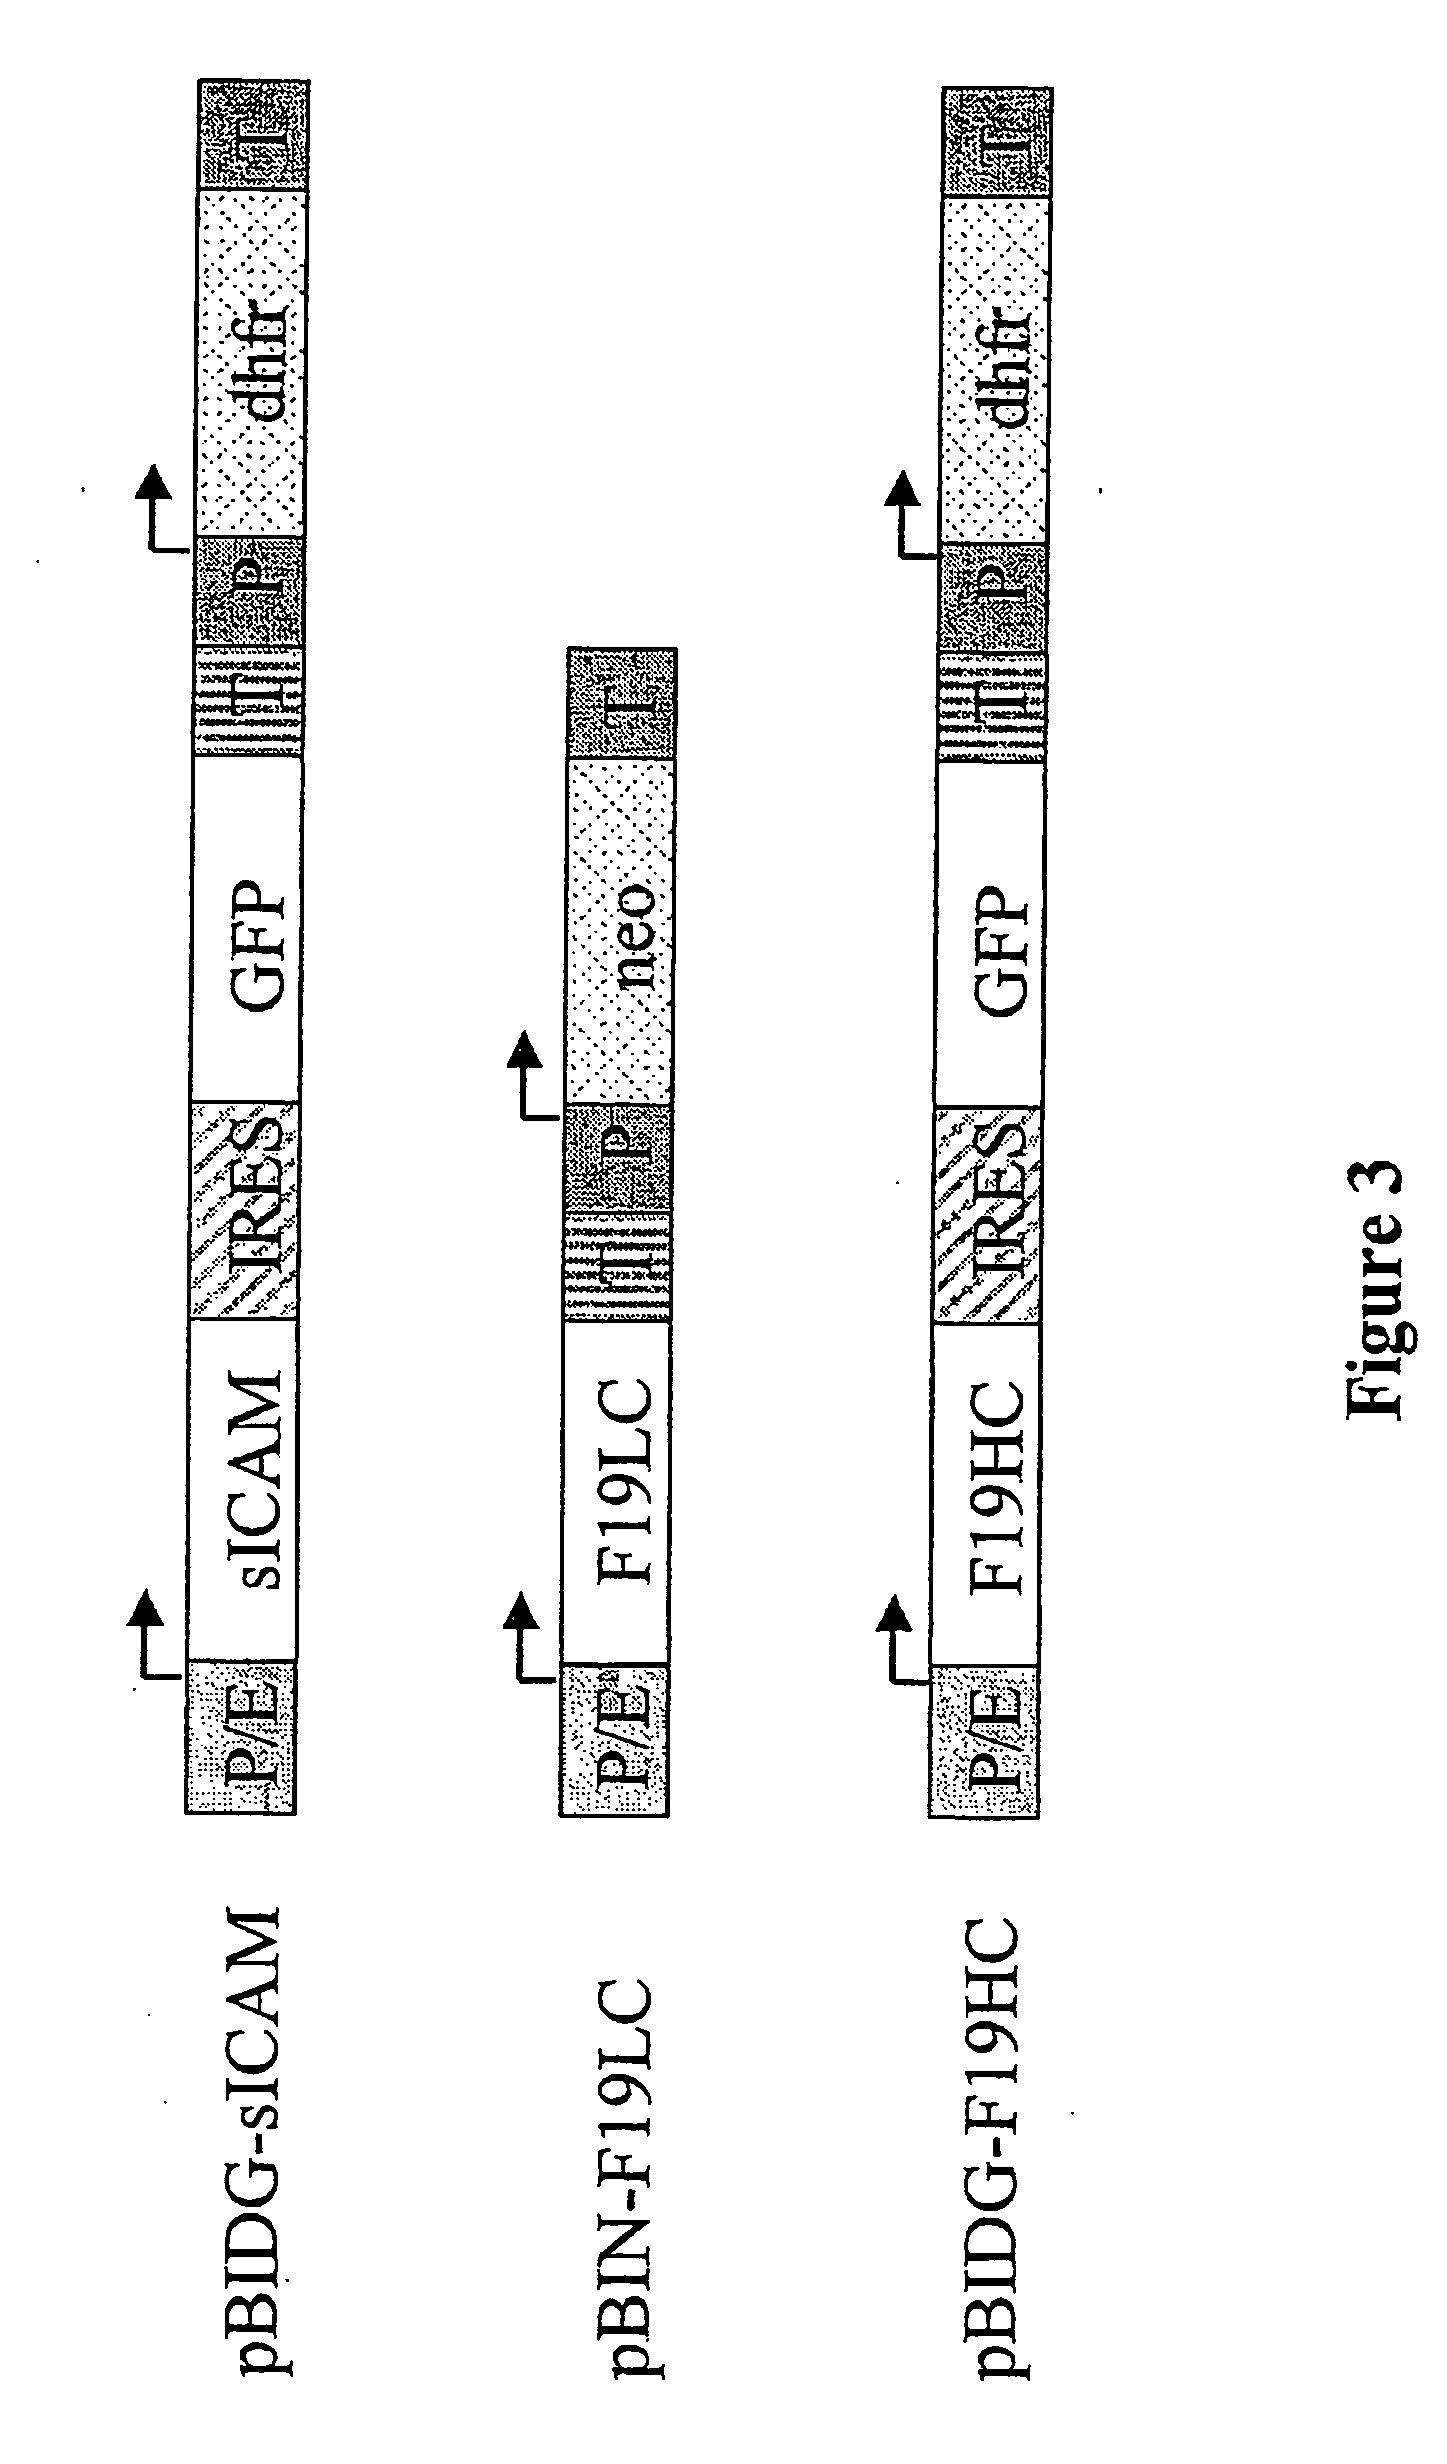 Expression vector, methods for the production of heterologous gene products and for the selection of recombinant cells producing high levels of such products